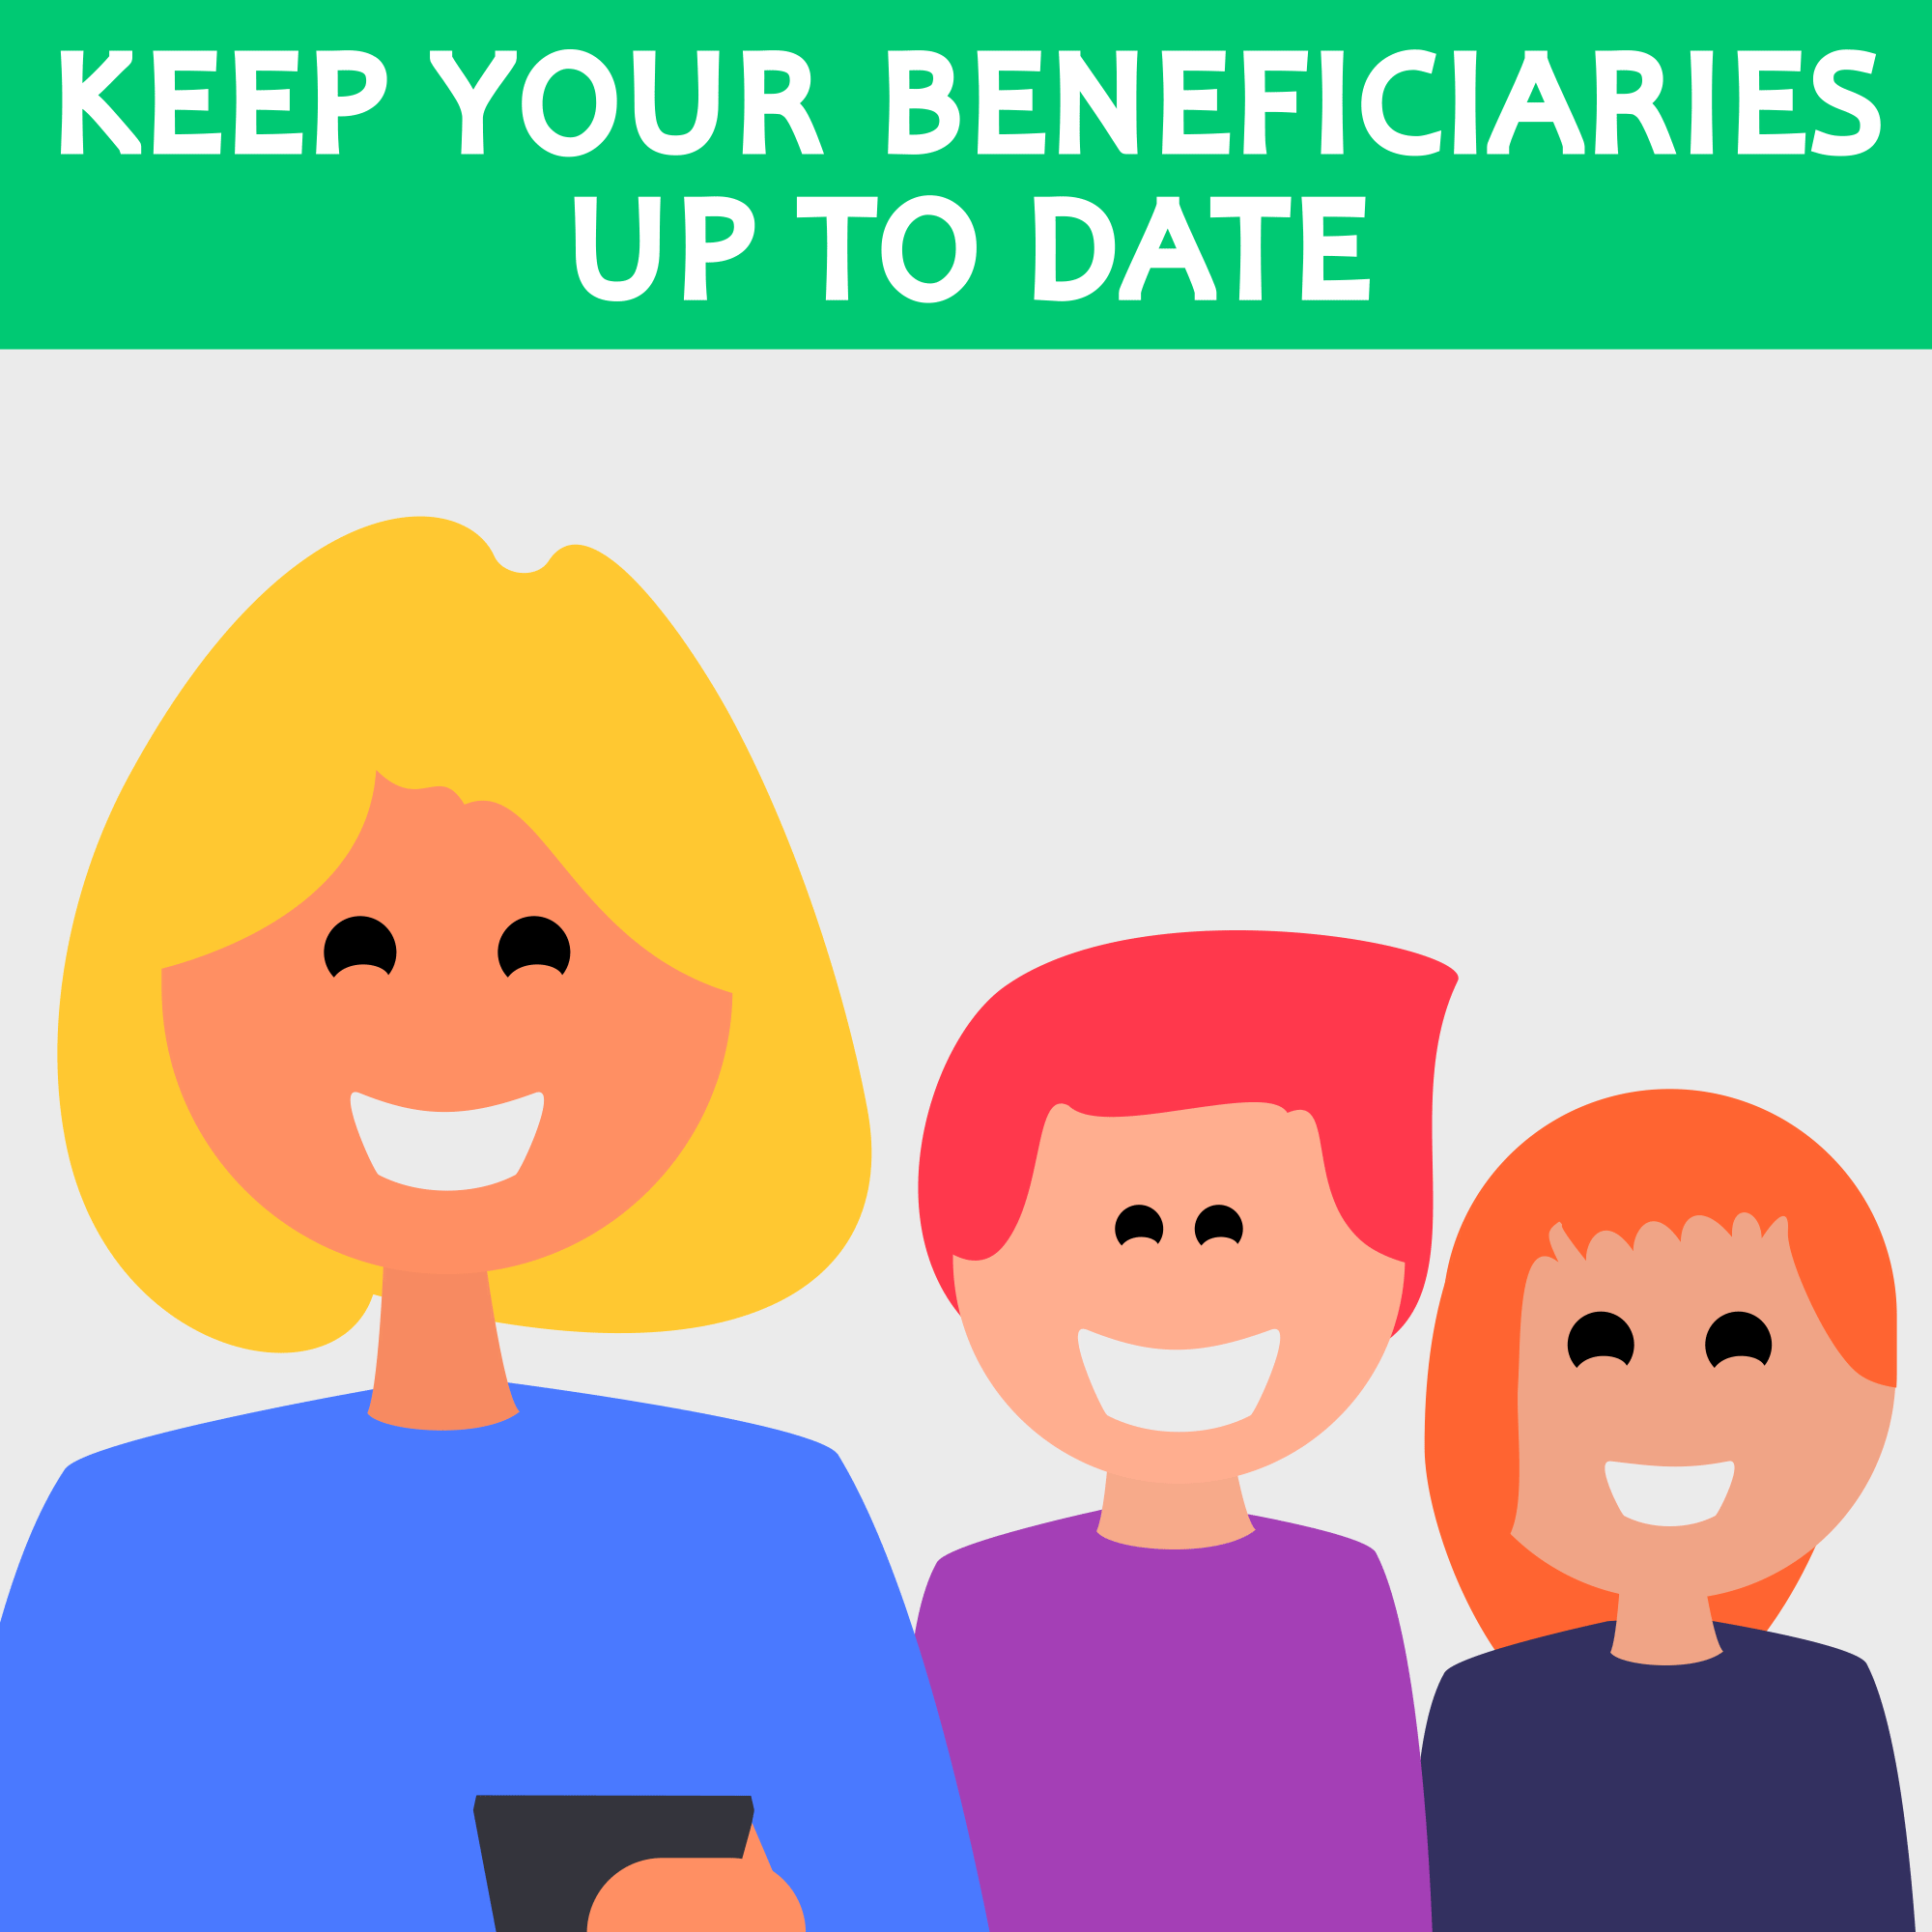 Log in to Your DCP Account: Keep Beneficiaries Up to Date